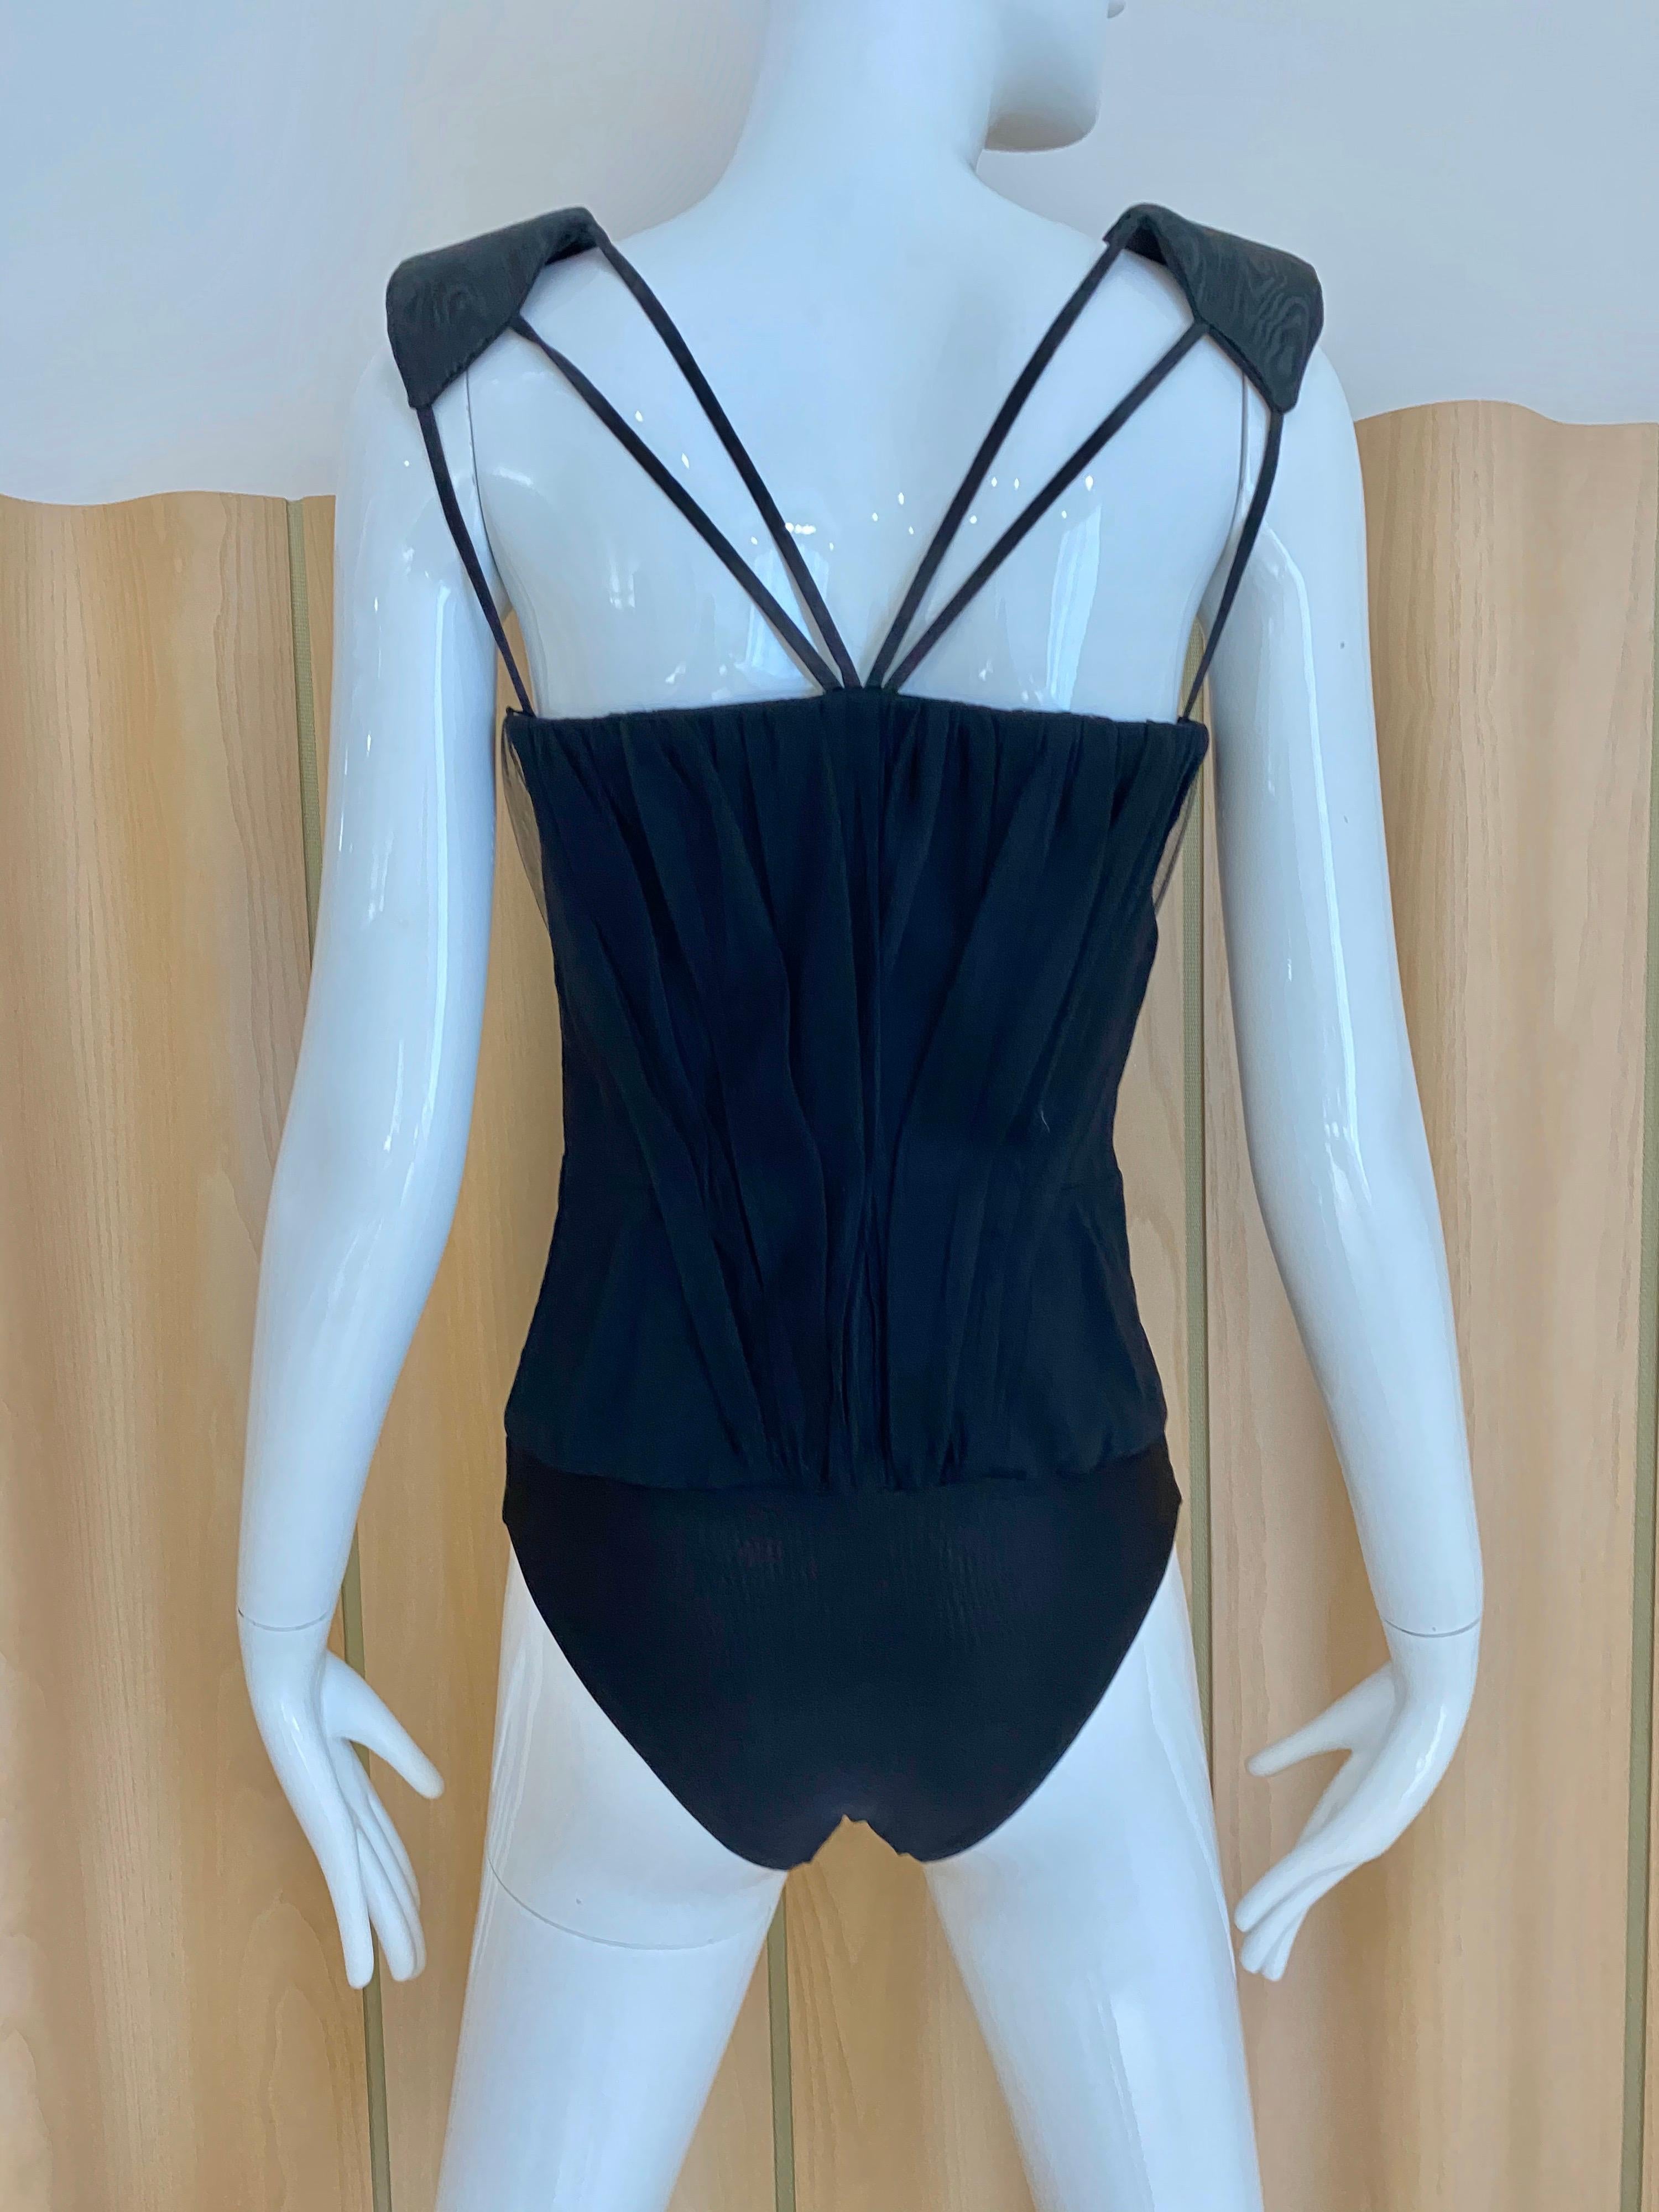 Viktor Rolf Black Bodysuit with shoulder pads In Excellent Condition For Sale In Beverly Hills, CA